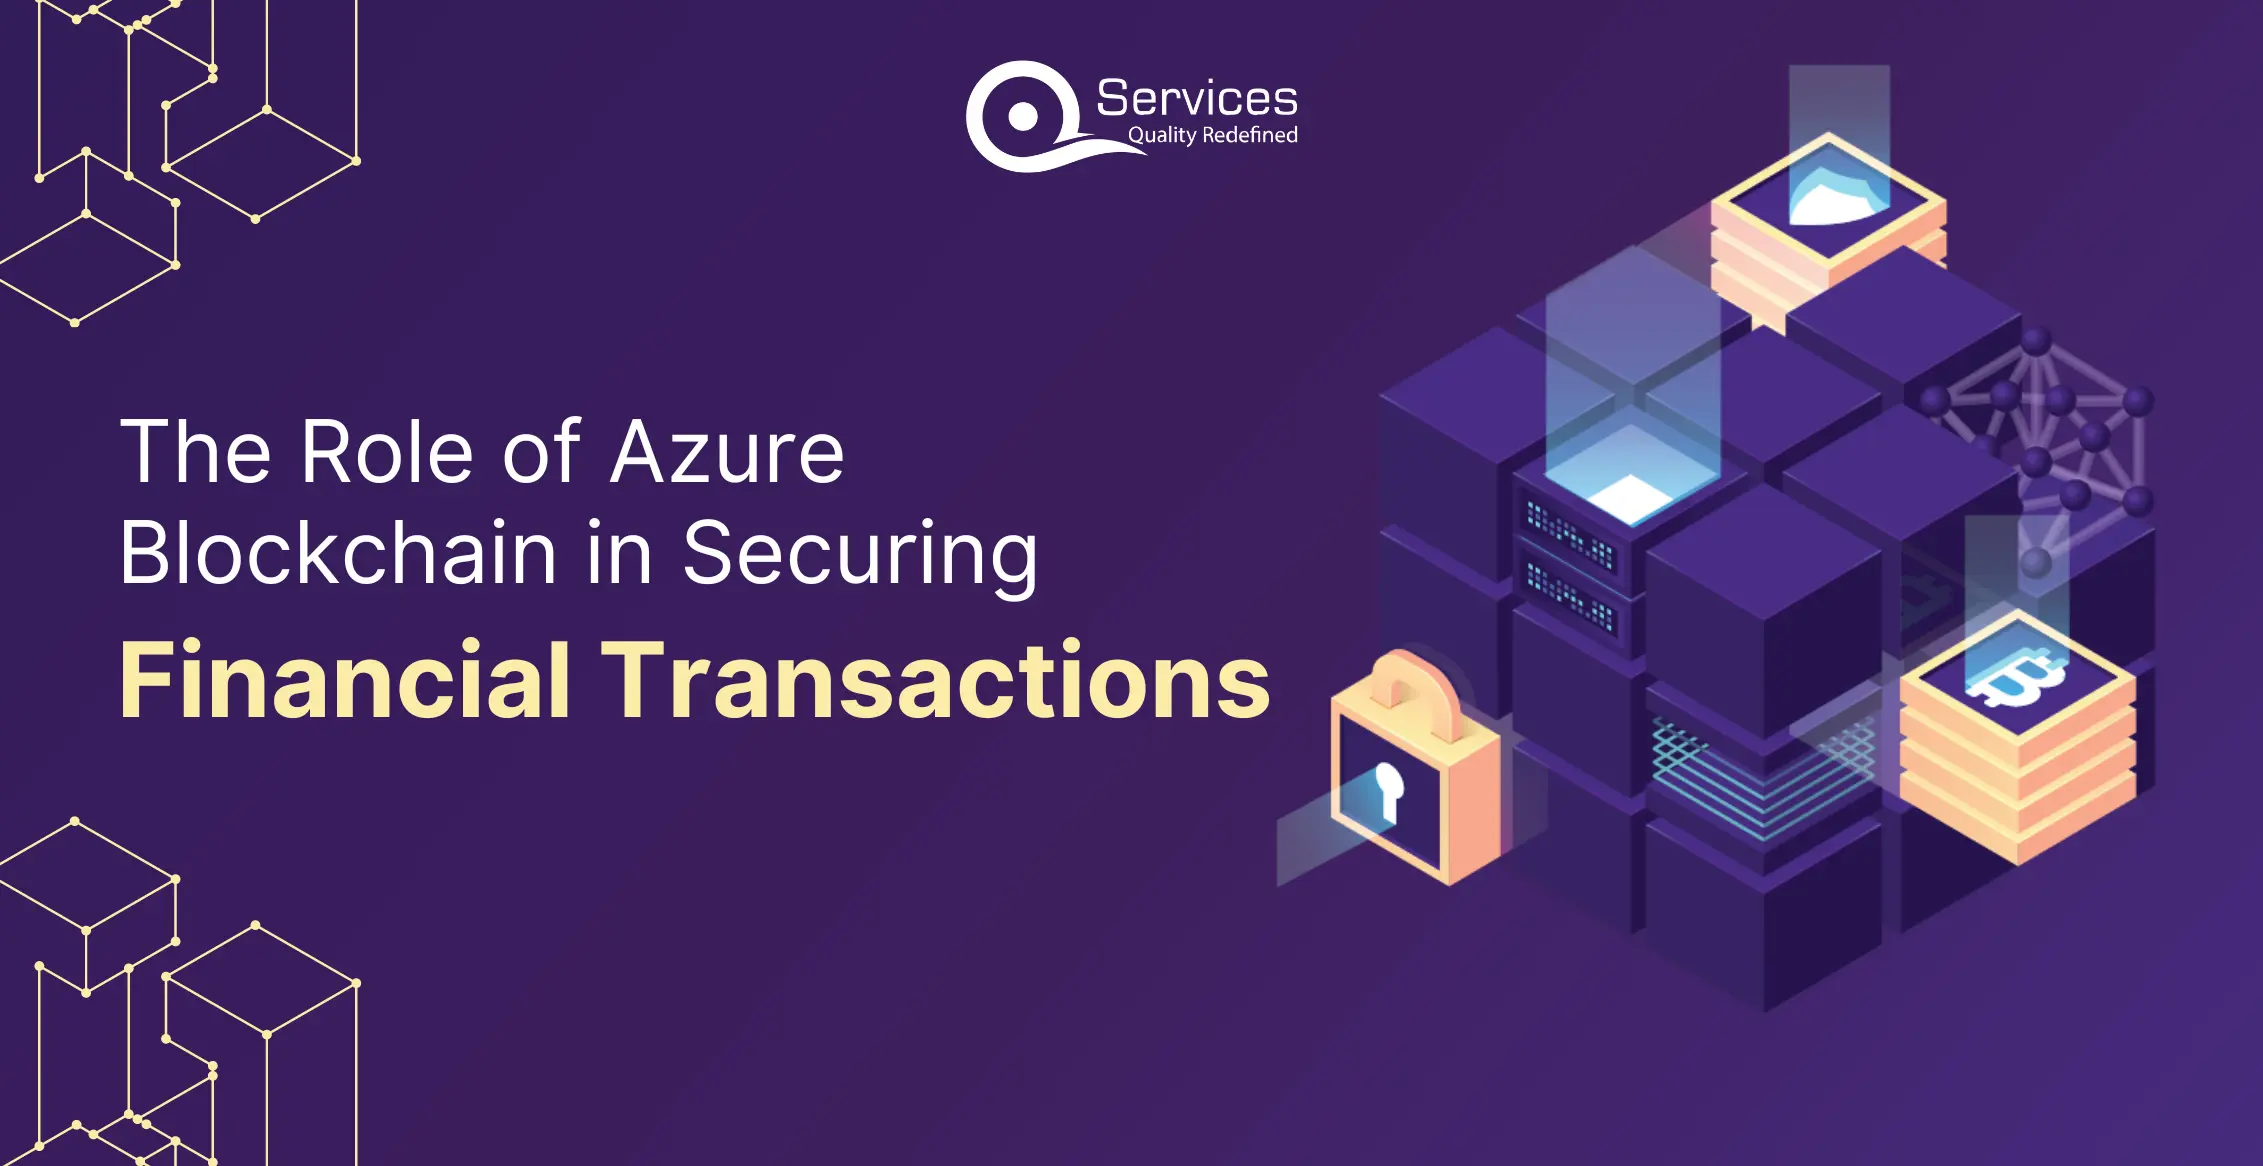 Azure Blockchain in Securing Financial Transactions